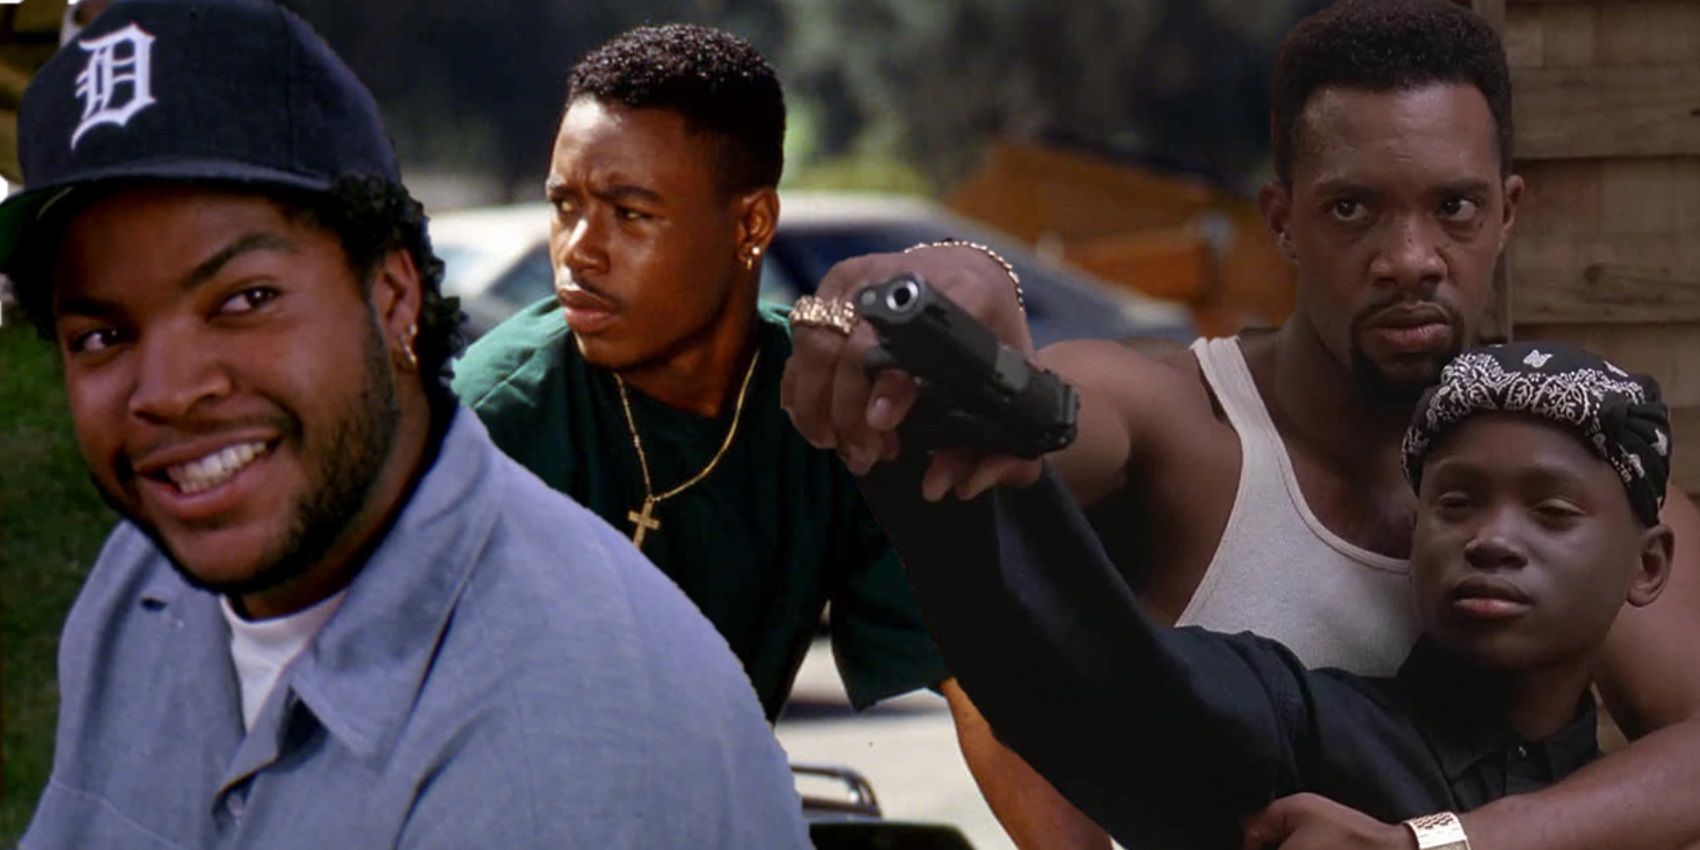 Collage of characters in Boyz n the Hood, Menace II Society, and South Central